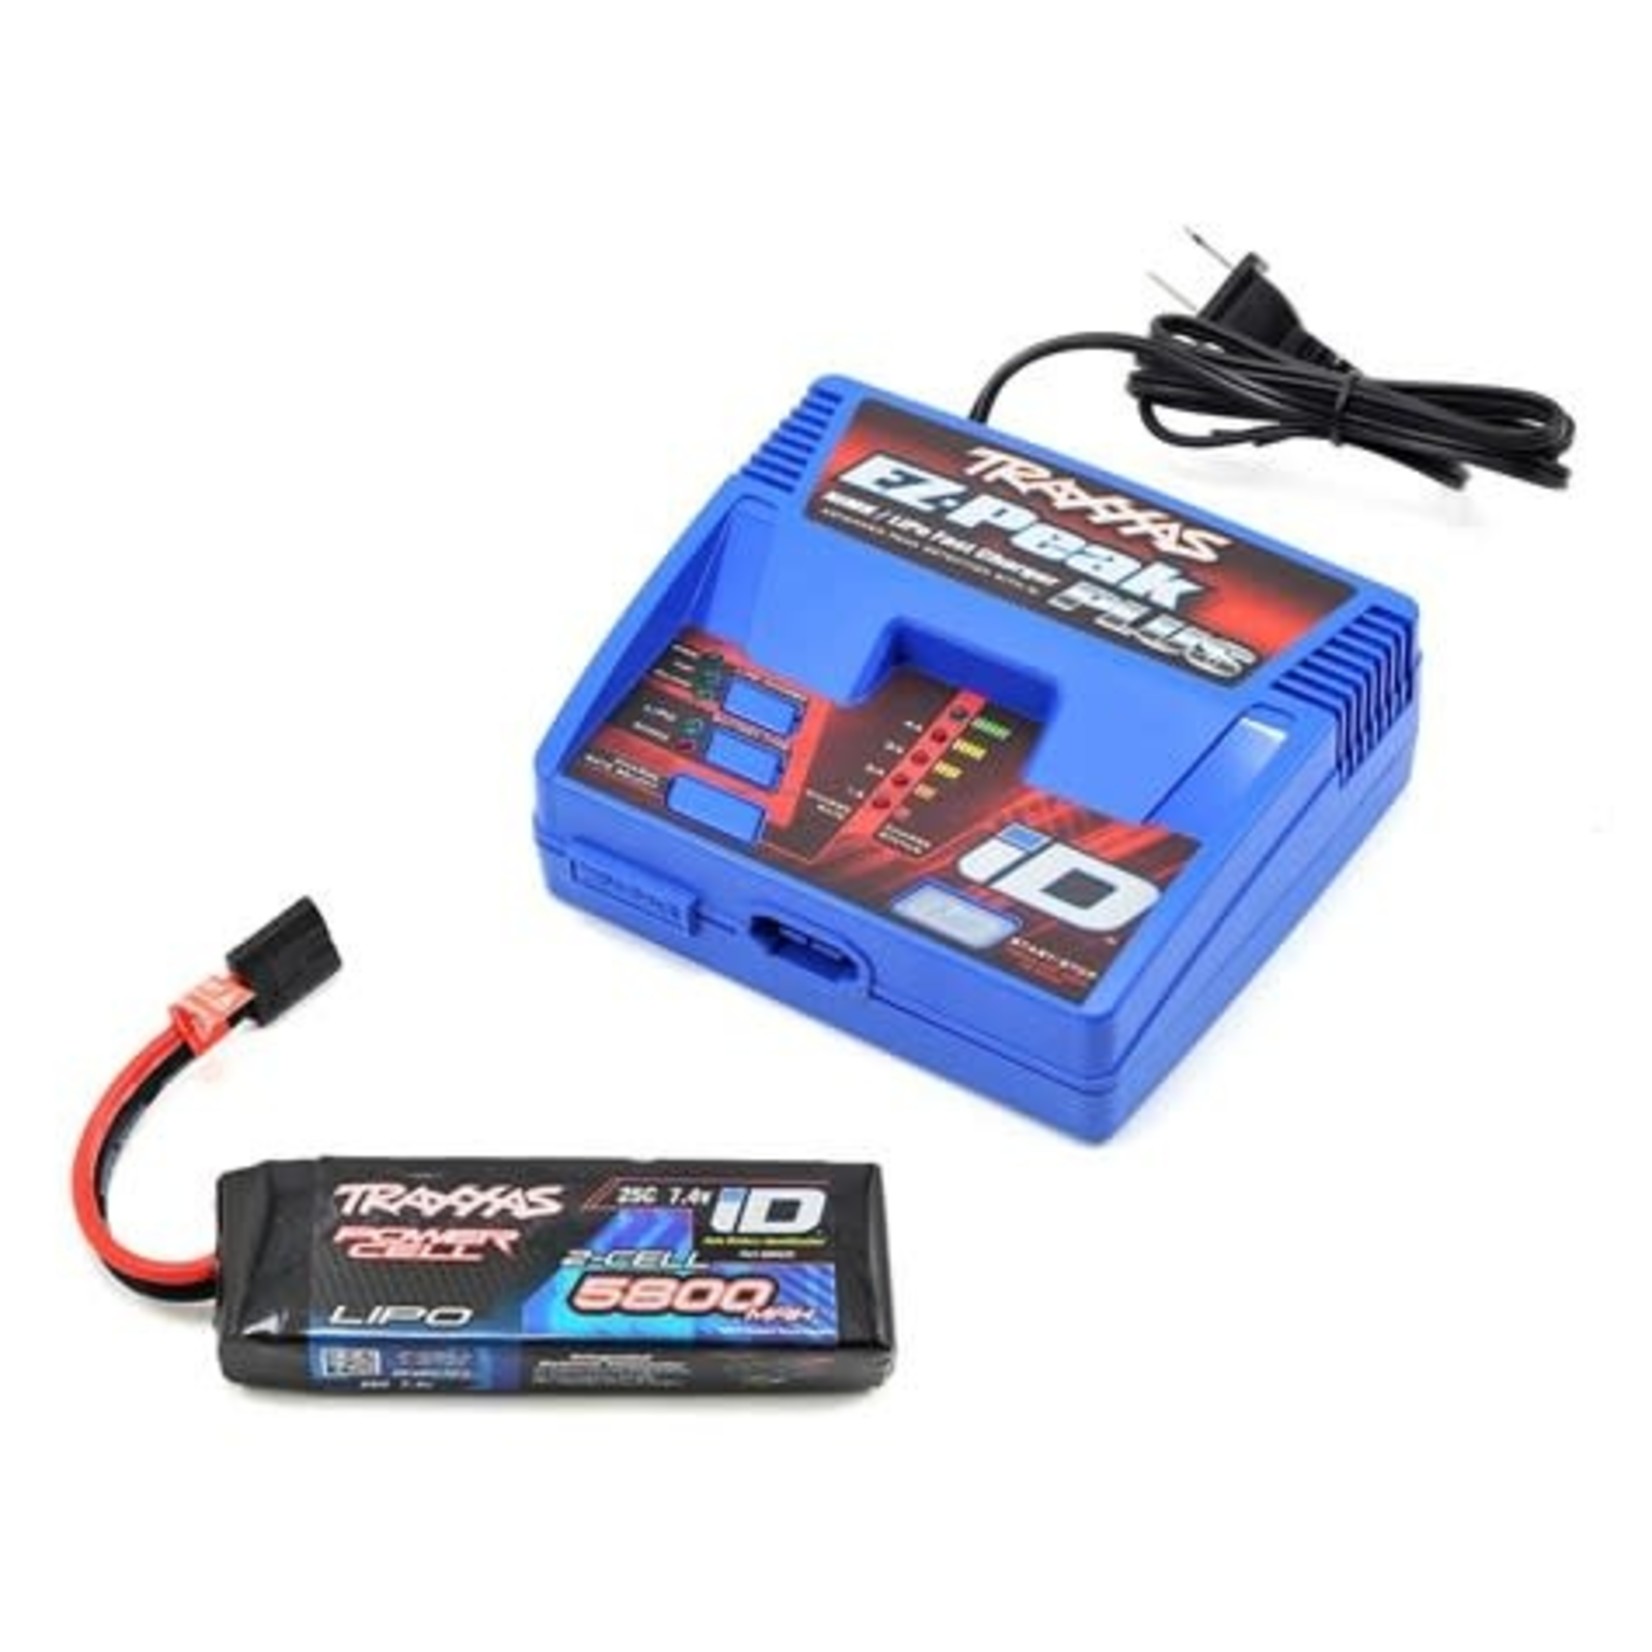 Traxxas Traxxas EZ-Peak 2S Single "Completer Pack" Multi-Chemistry Battery Charger w/One Power Cell Battery (5800mAh) #2992